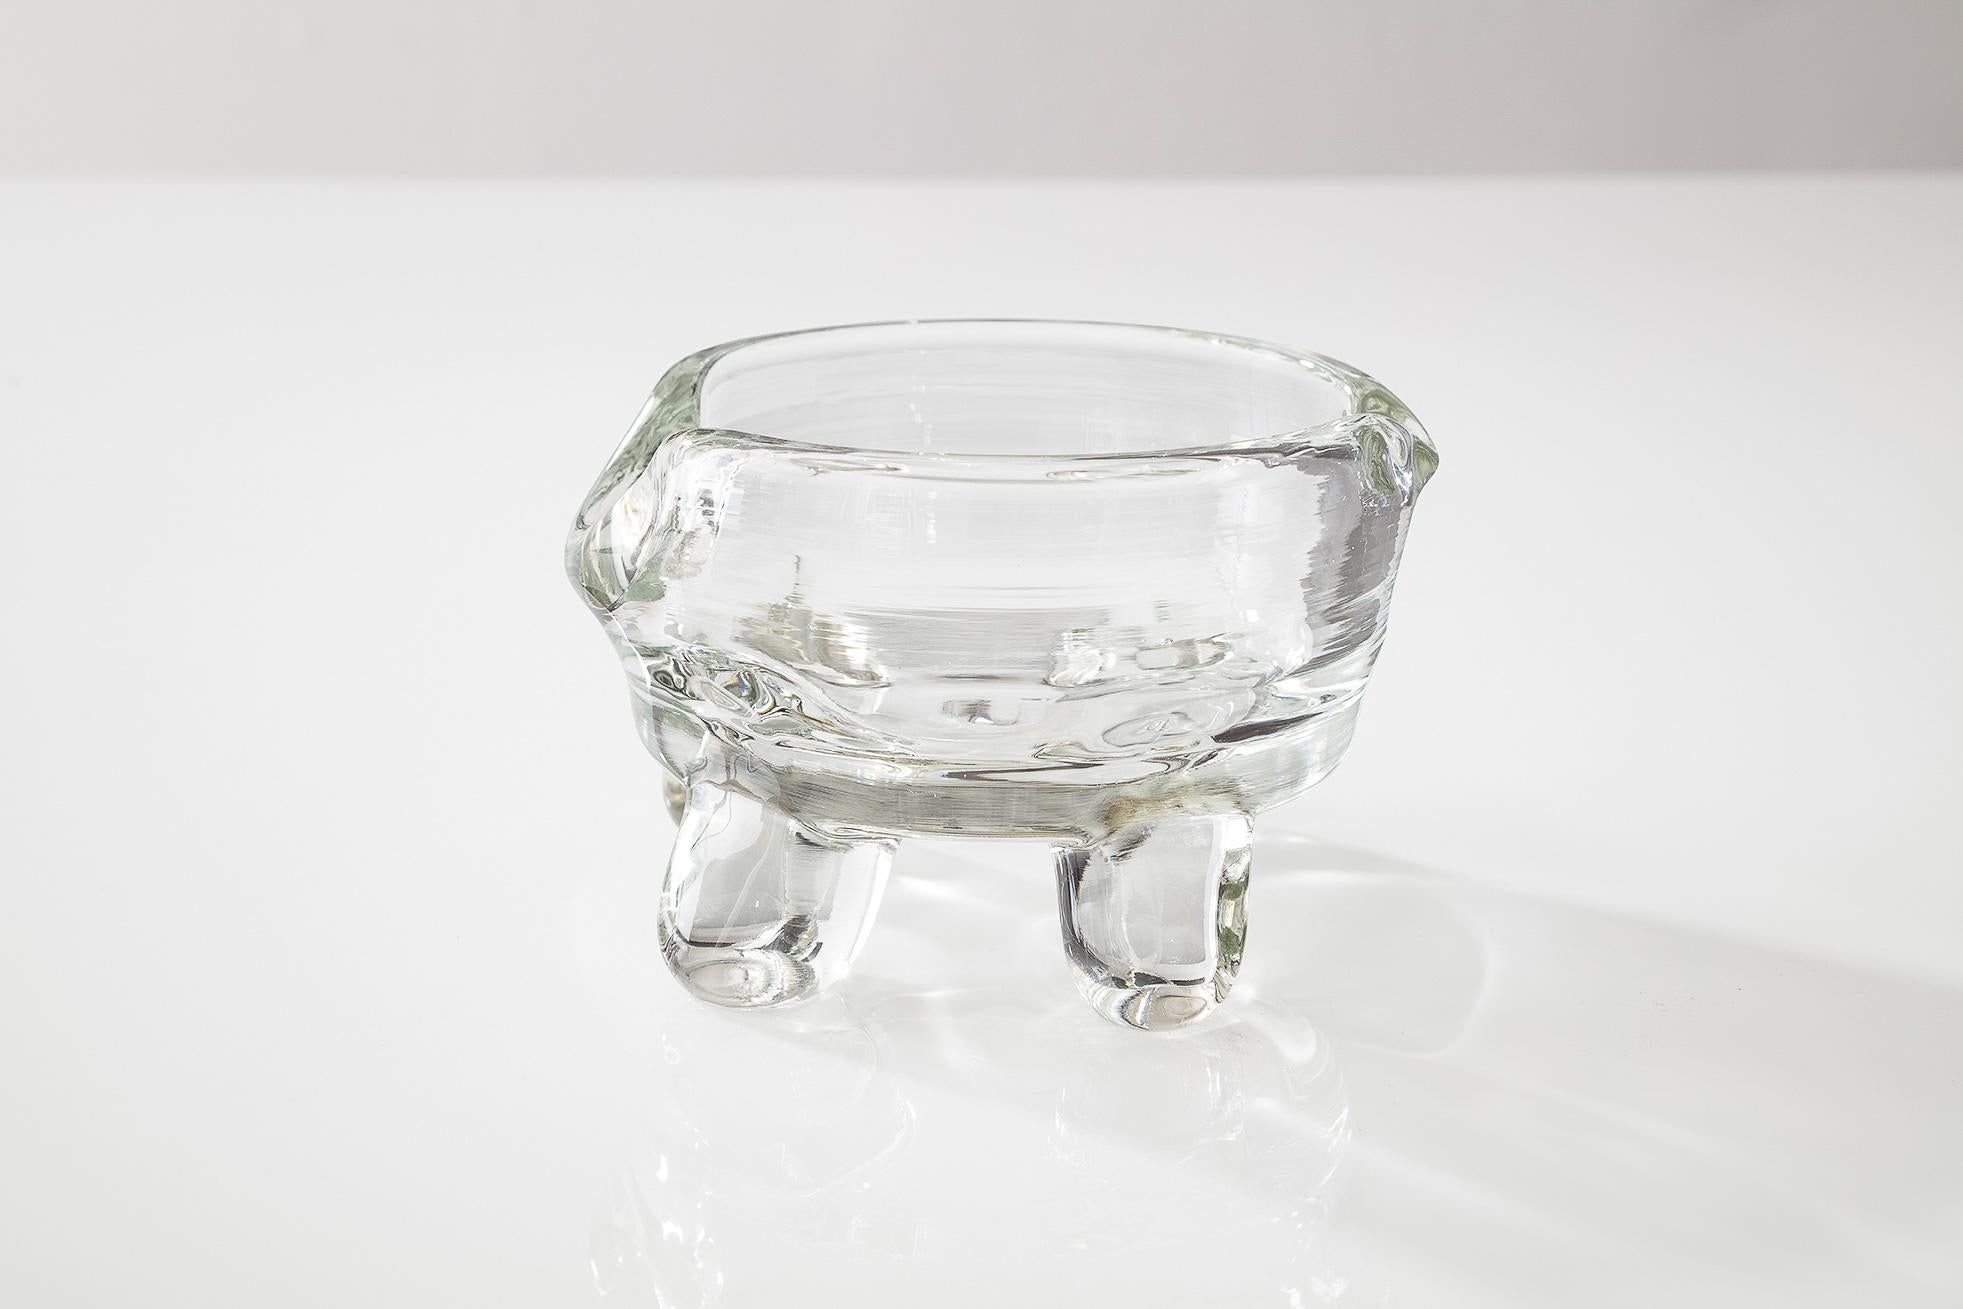 Weighty in presence, with translucence to put your smaller objects on display, this claw-foot sculpture can effortlessly accent other pieces or stand alone.

Handmade by Jason Bauer and Romina Gonzales
Materials: Glass
Dimensions: H 3